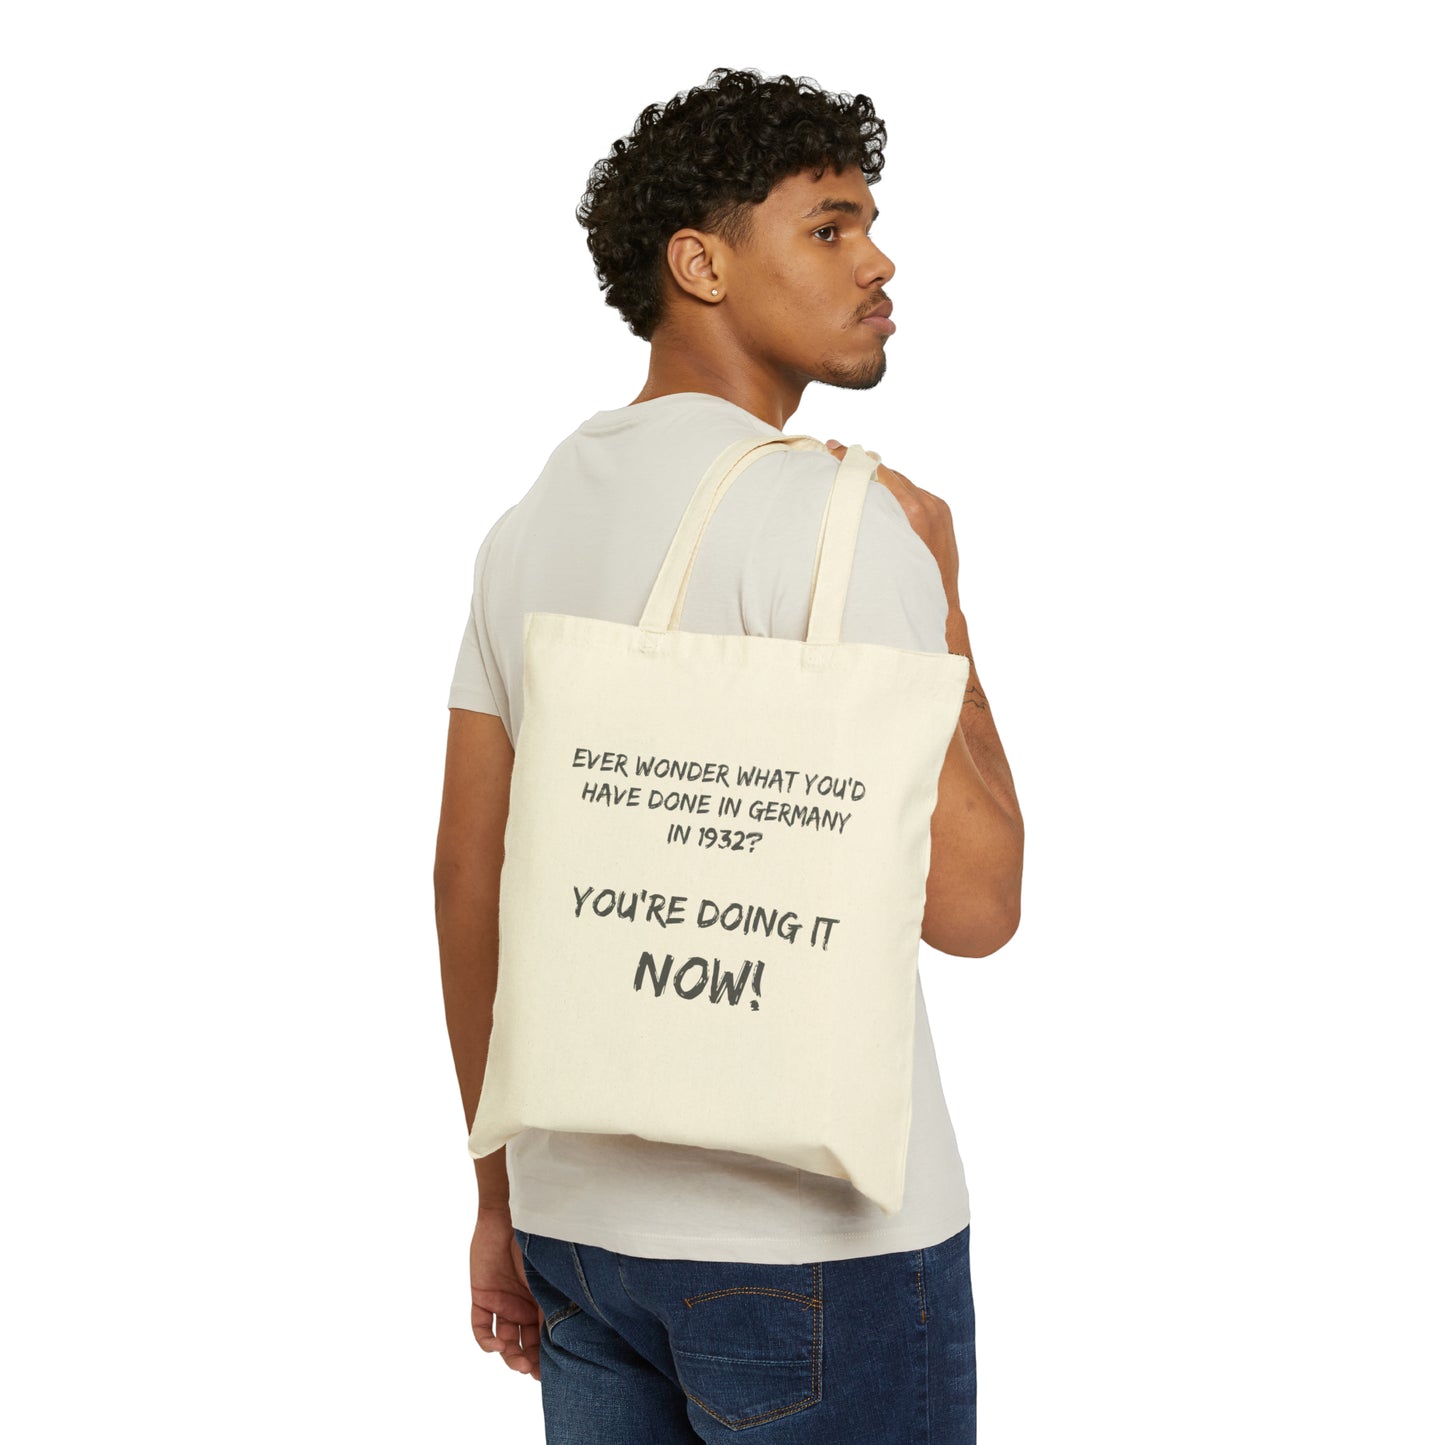 Ever Wonder What You'd Have Done? (Canvas Tote Bag)